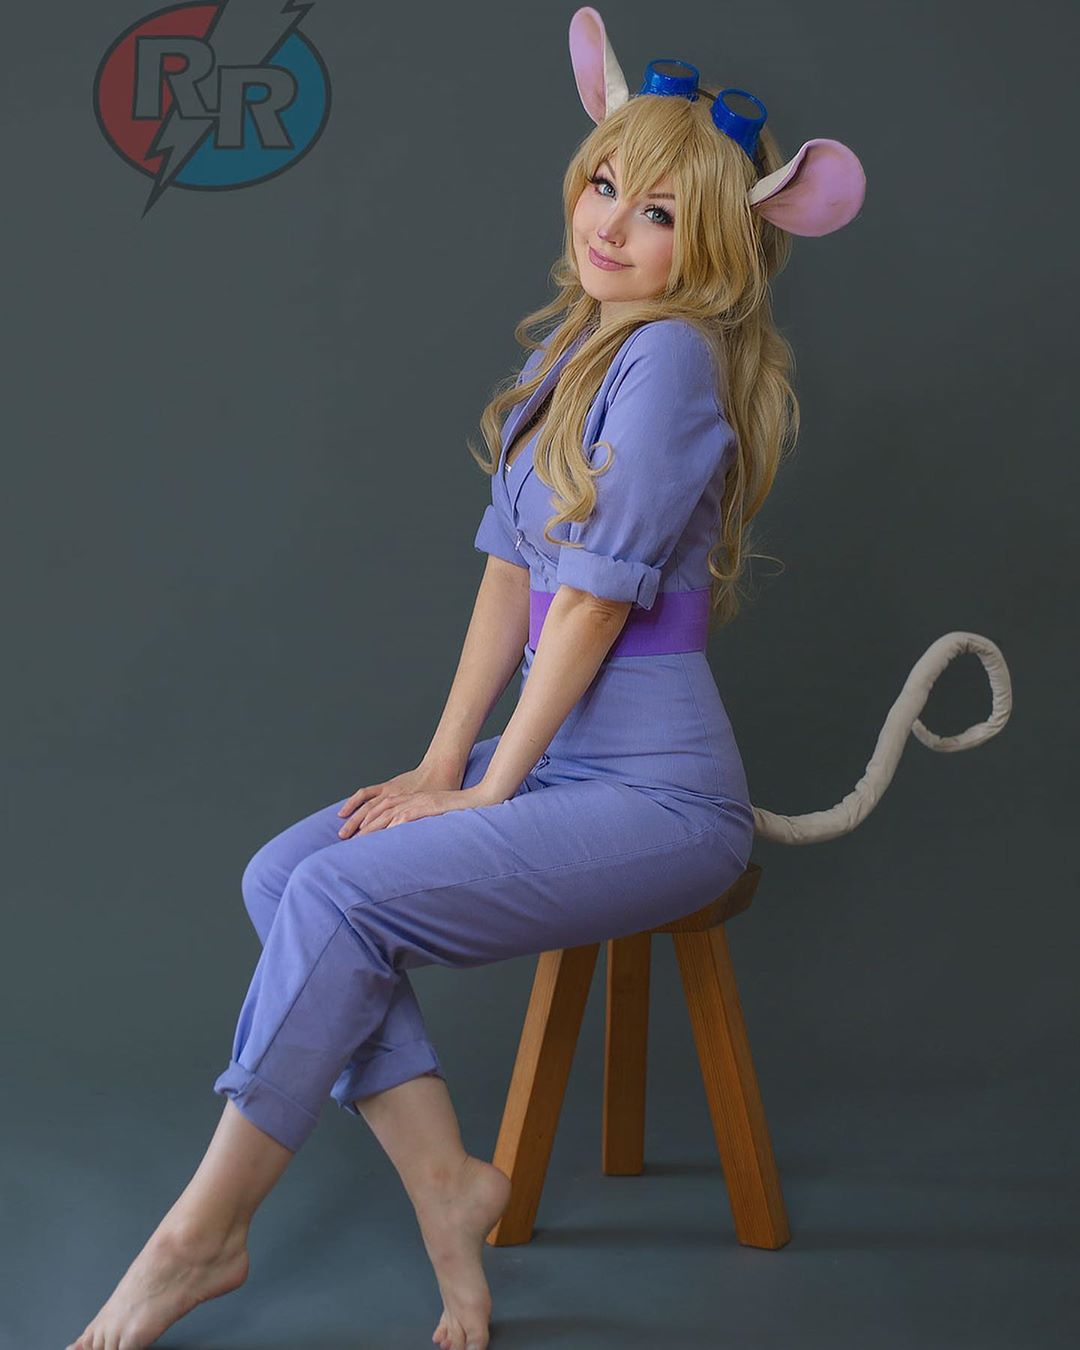 Gadget - Cosplay, Chip and Dale, Cartoons, Costume, Longpost, Gadget hackwrench, 